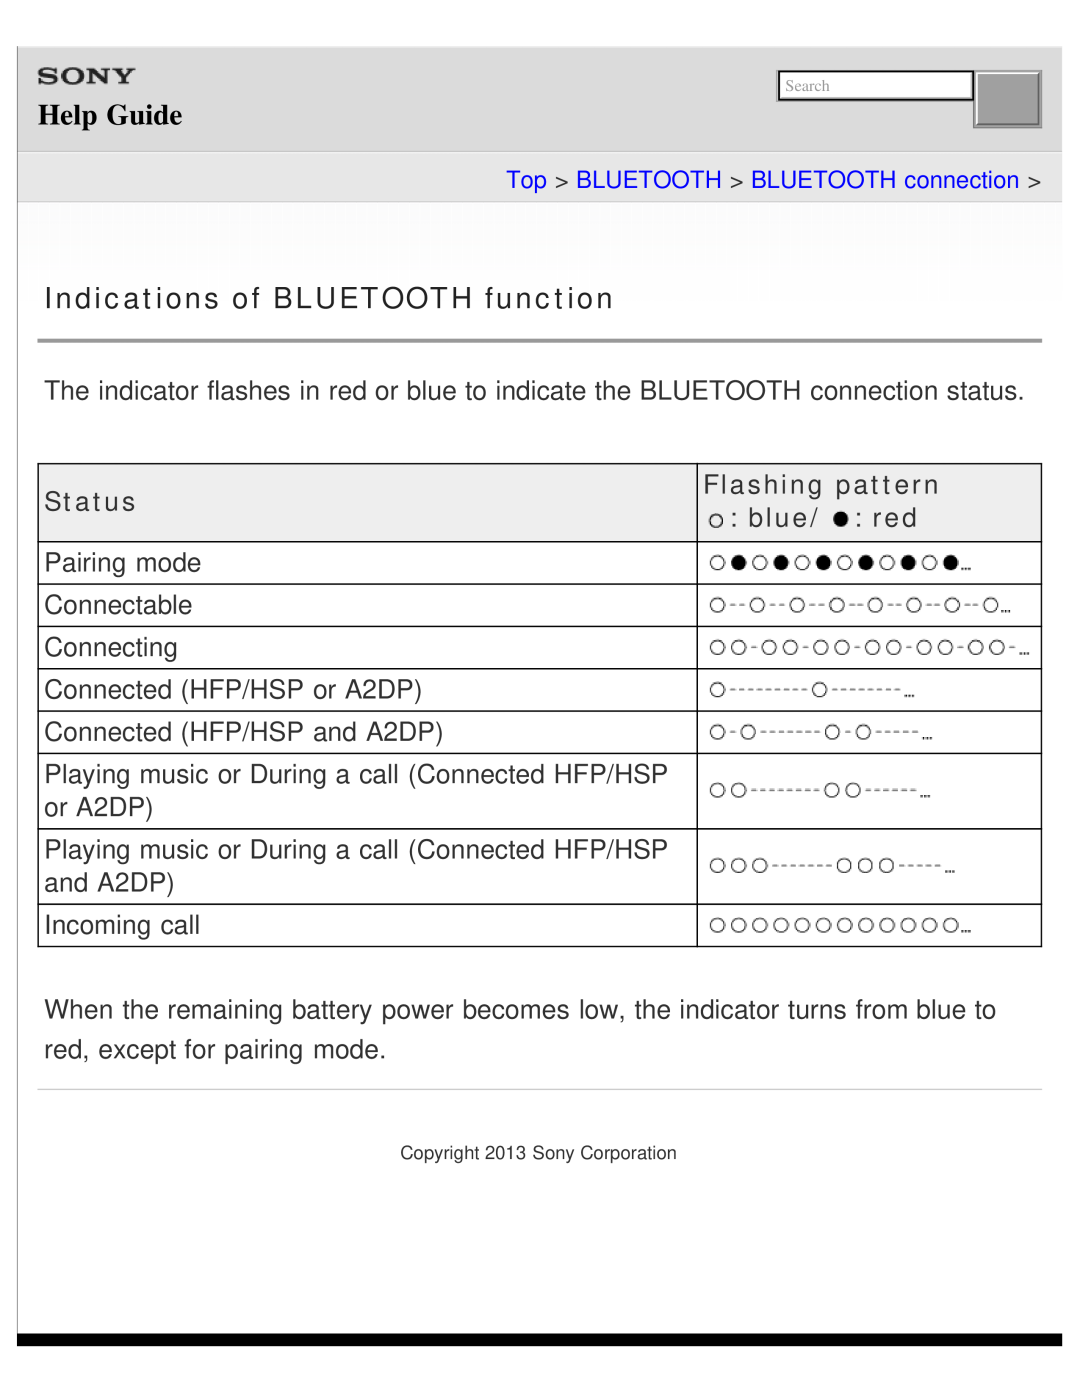 Sony DR-BTN200 manual Indications of BLUETOOTH function, Flashing pattern, blue/ red, Help Guide, Status 